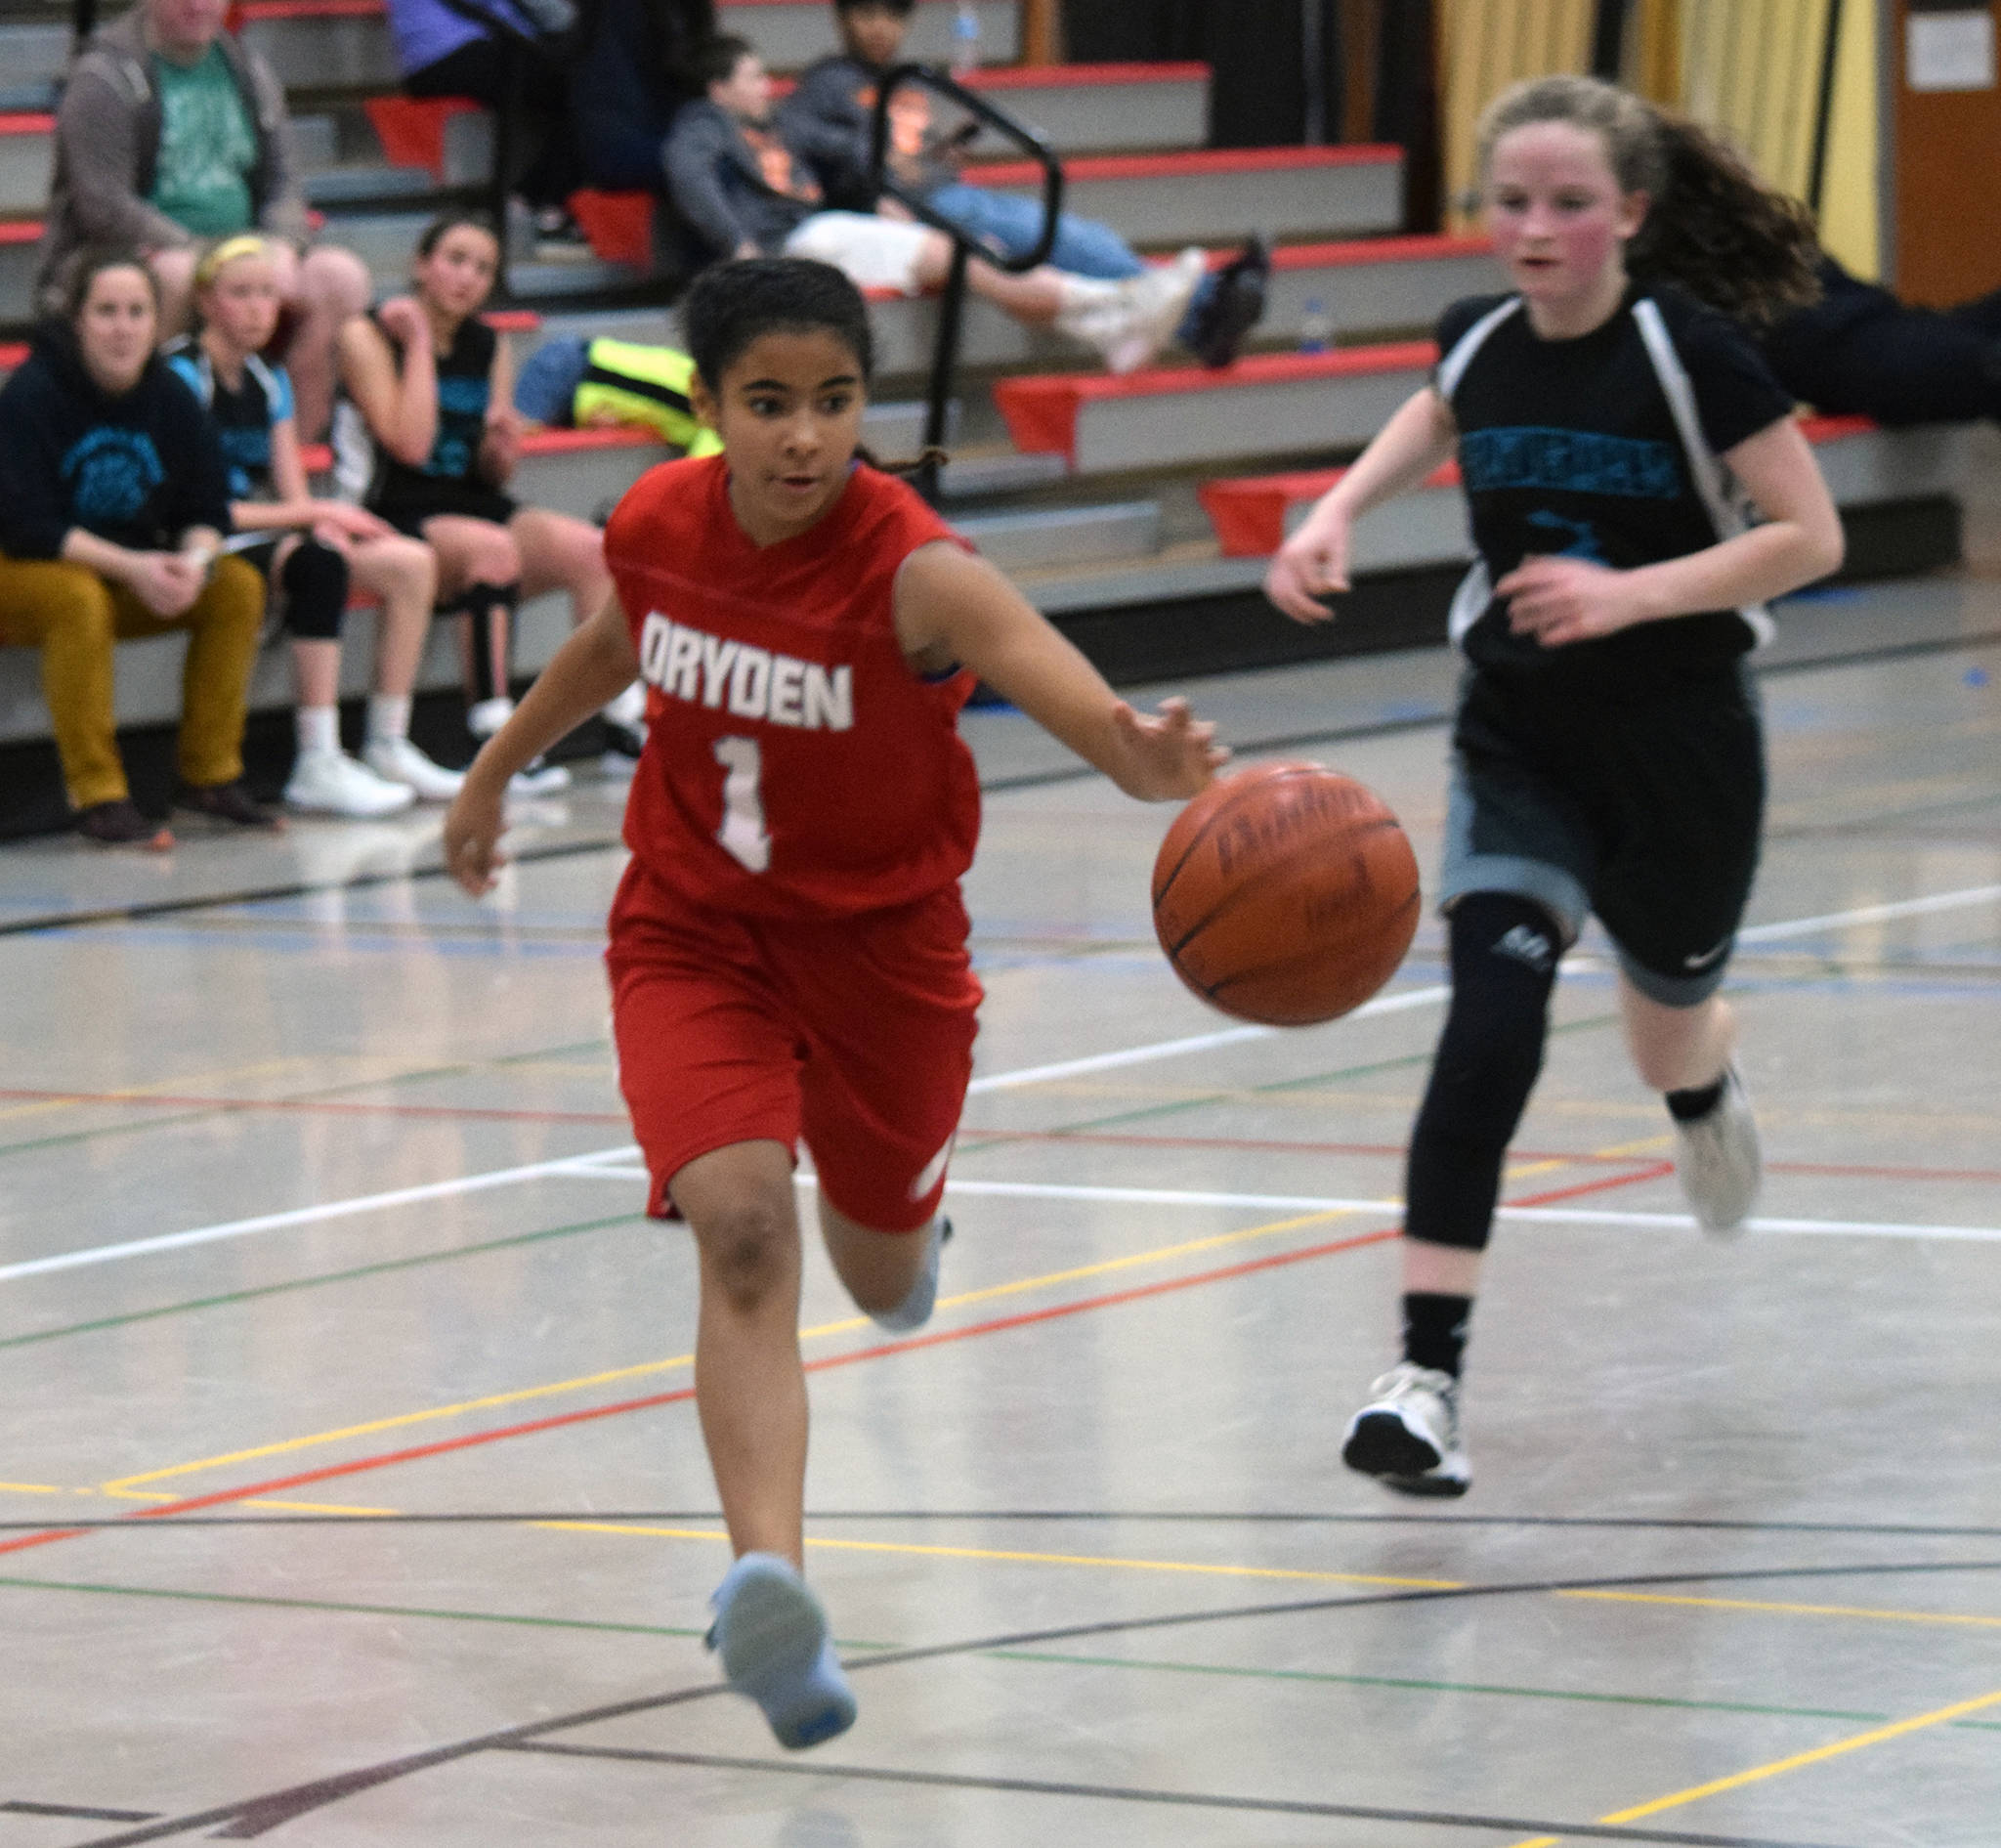 Floyd Dryden’s Jadid Polanco runs down the basketball while Dzantik’i Heeni’s Cambry Lockhart gives chase during a round-robin game at the Icebreaker Tournament at FDMS on Friday, Dec. 6, 2019. (Nolin Ainsworth | Juneau Empire)